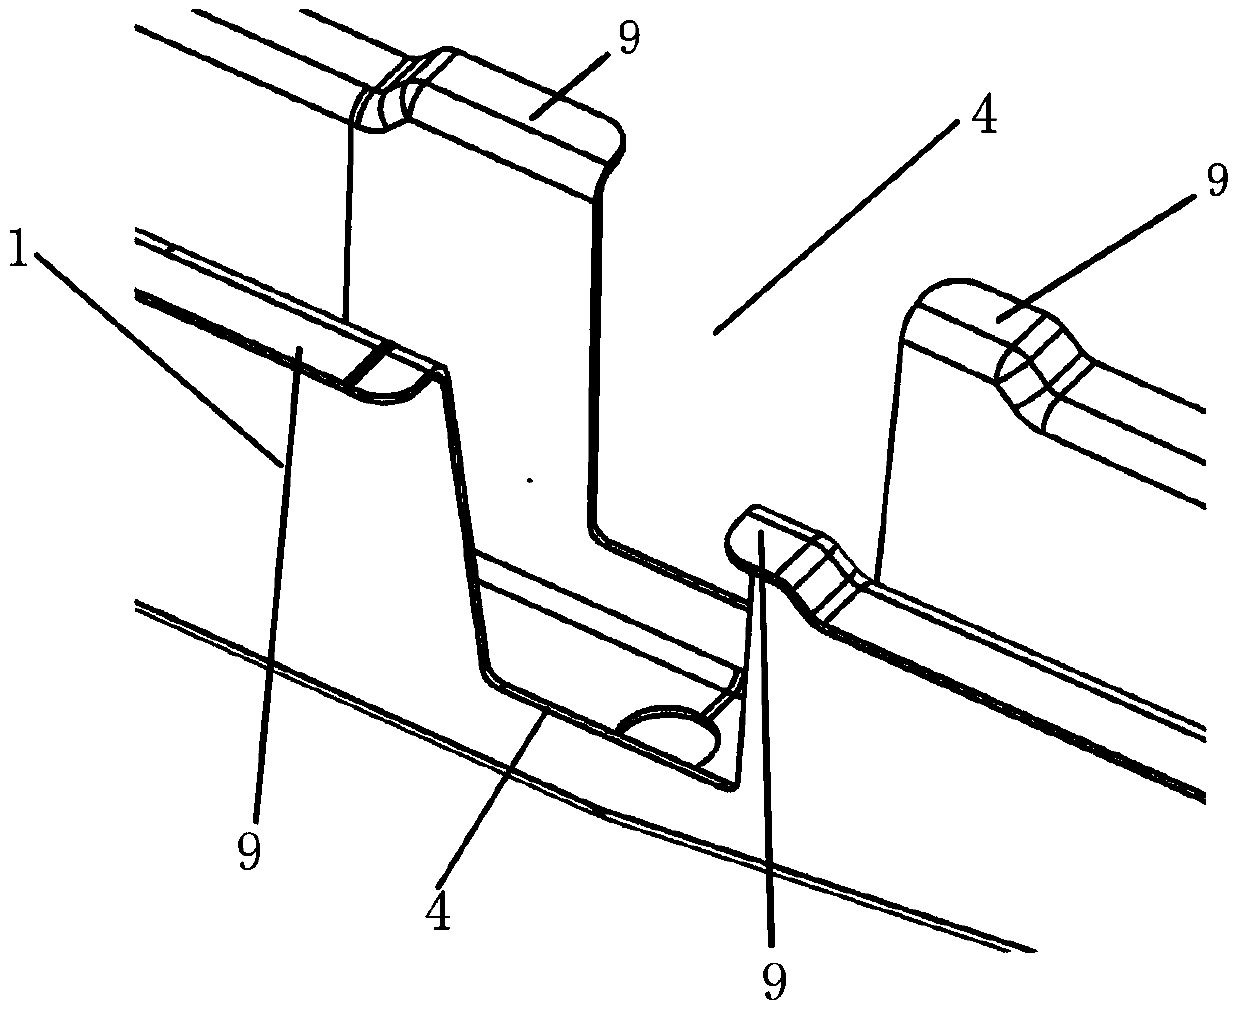 Beam and longitudinal beam connecting assembly